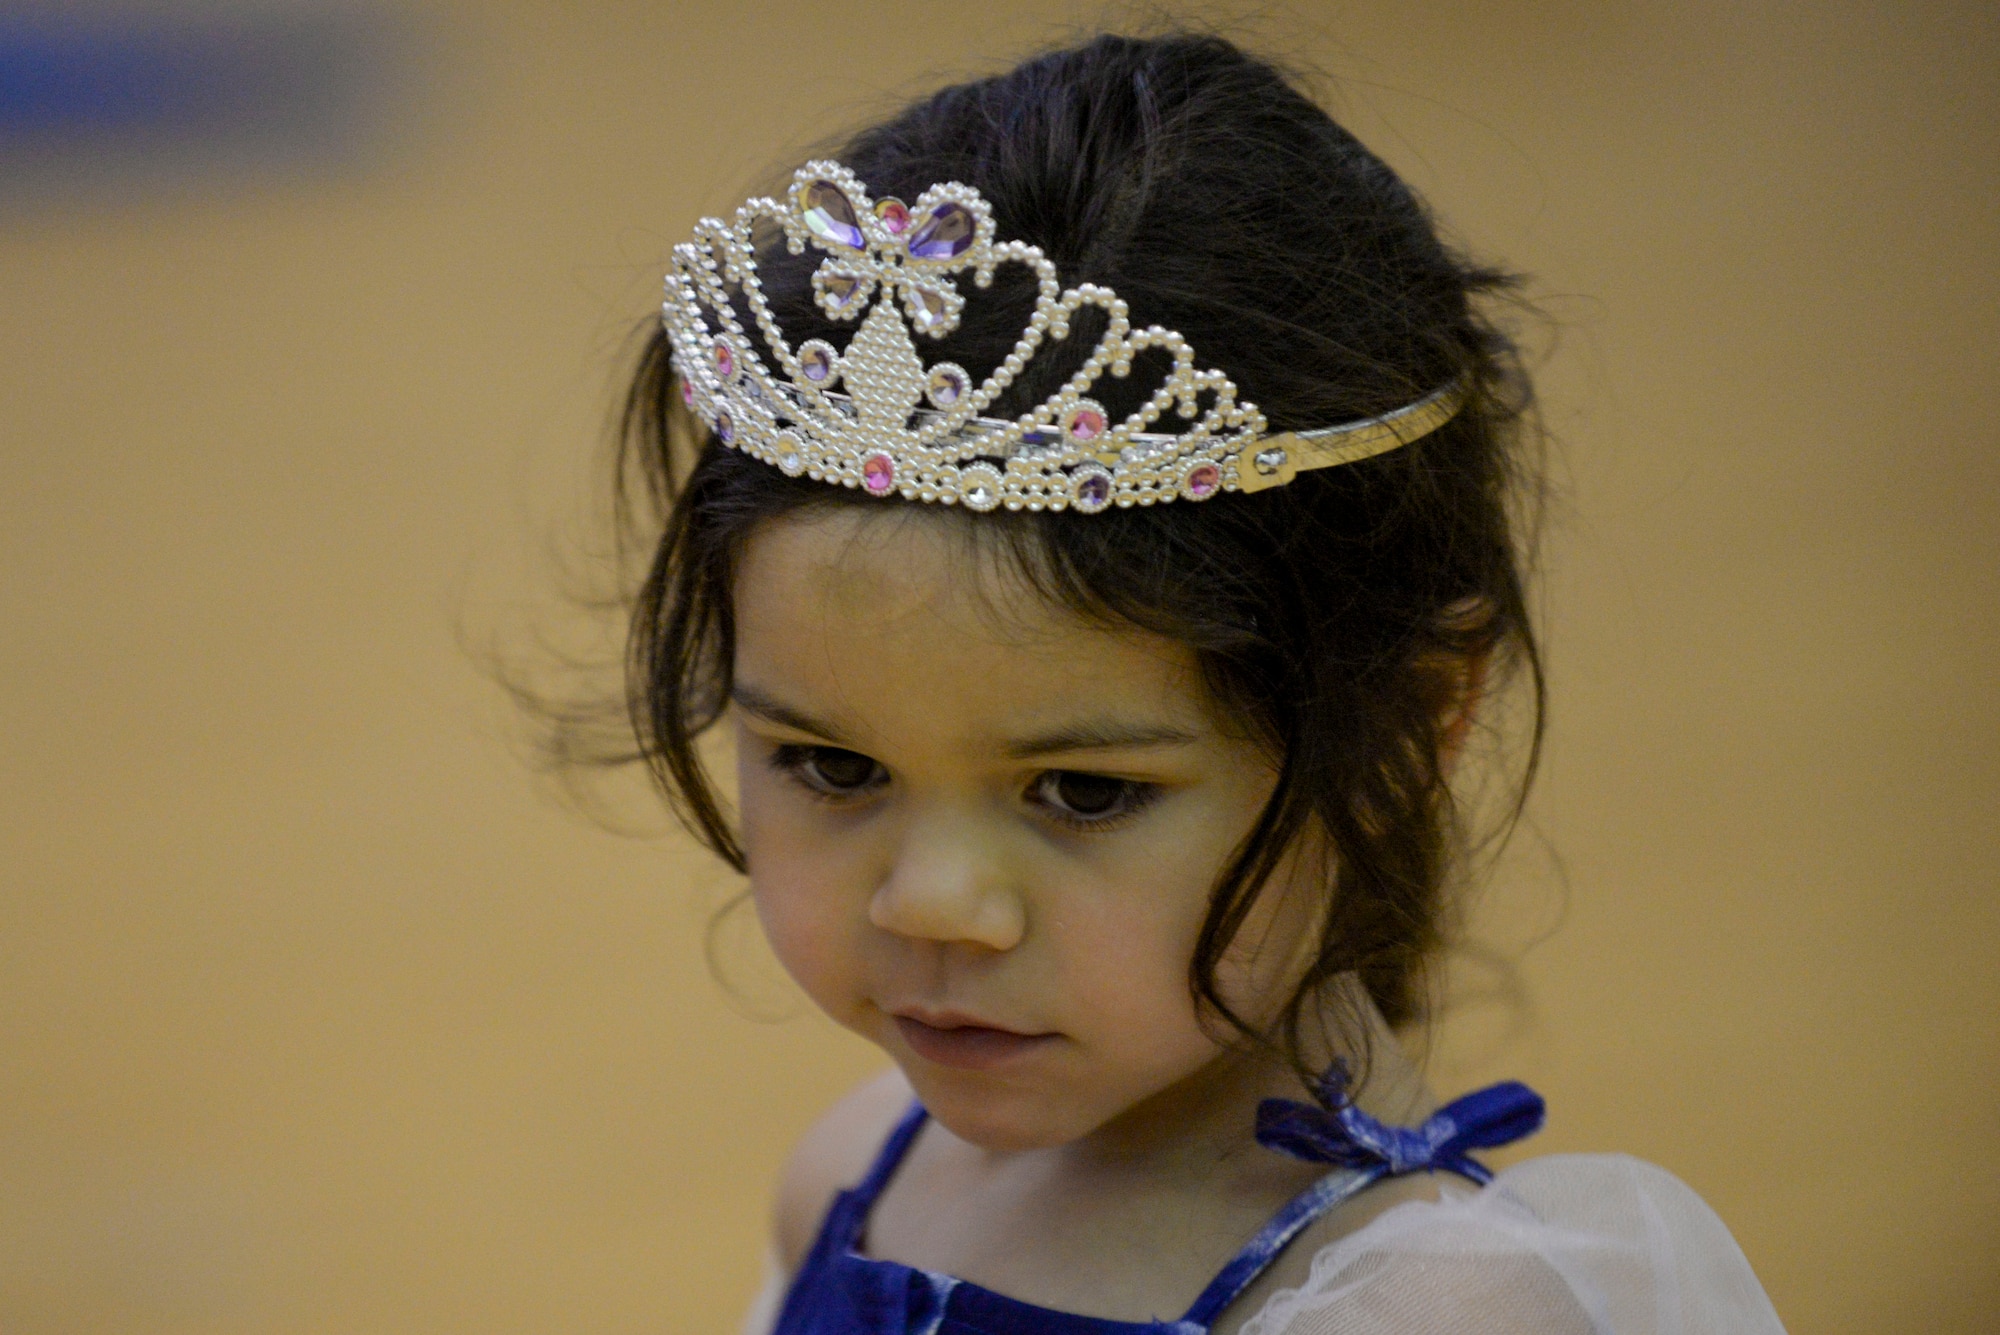 Adriana Mahoney-Garcia listens to the instructor during Princess Dance Camp at the Youth Center at Minot Air Force Base, N.D., June 29, 2016. Dancers were taught basic instructions to ballet during the week-long camp. (U.S. Air Force photo/Airman 1st Class Jessica Weissman)
